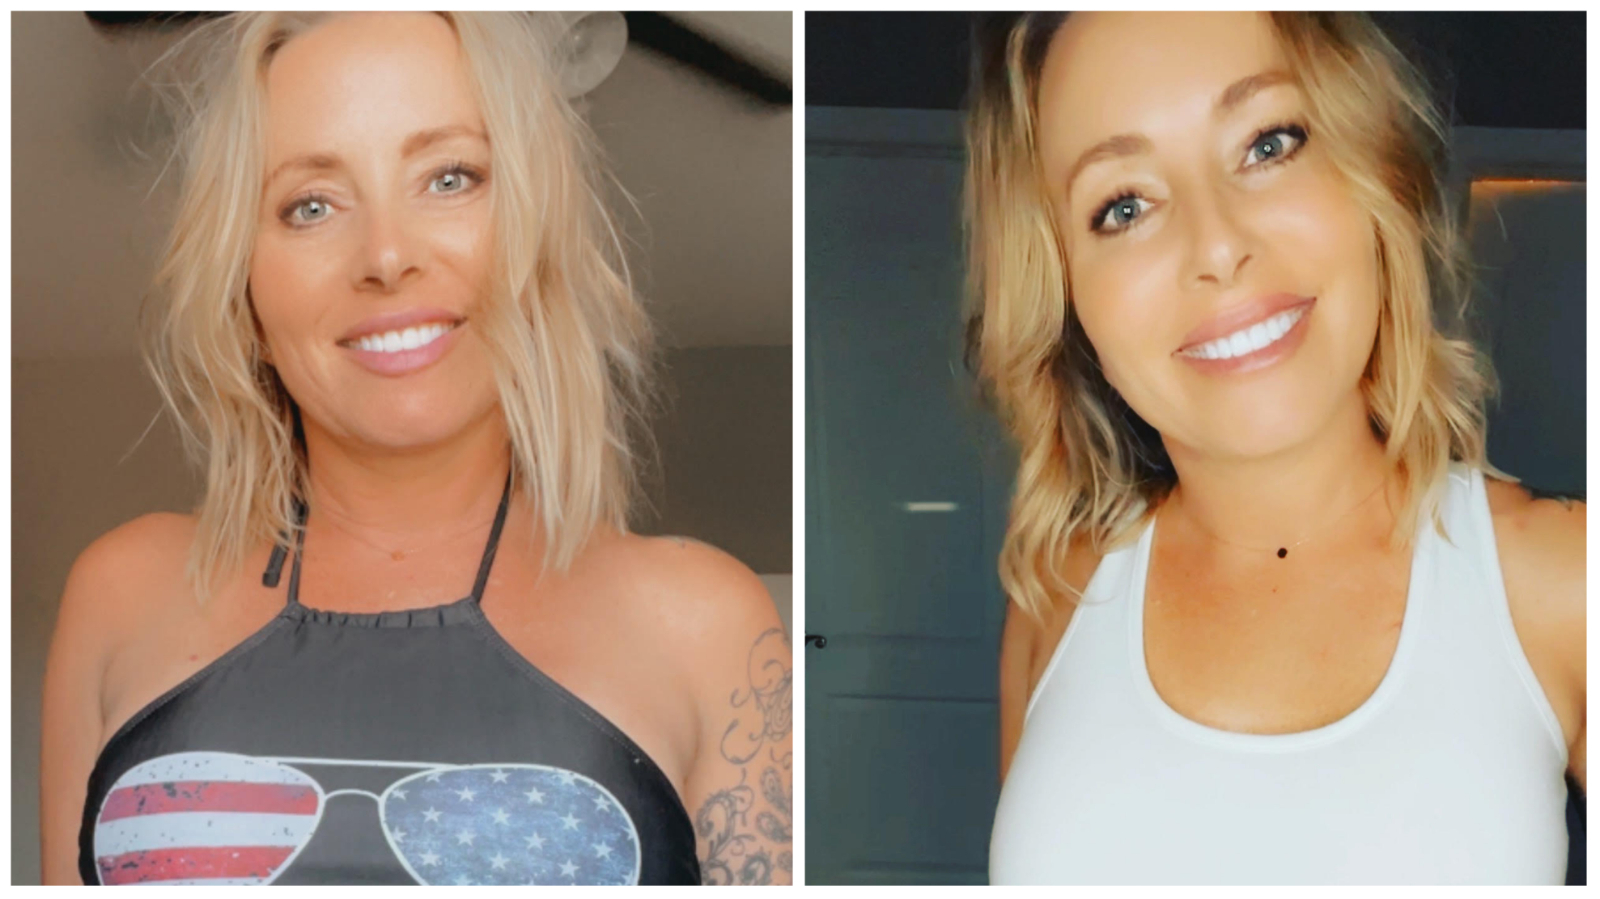 Regional Small-Town Mom Ignores The Haters While Making Big Money On Adult Site “OnlyFans” Your Wyoming News Source image